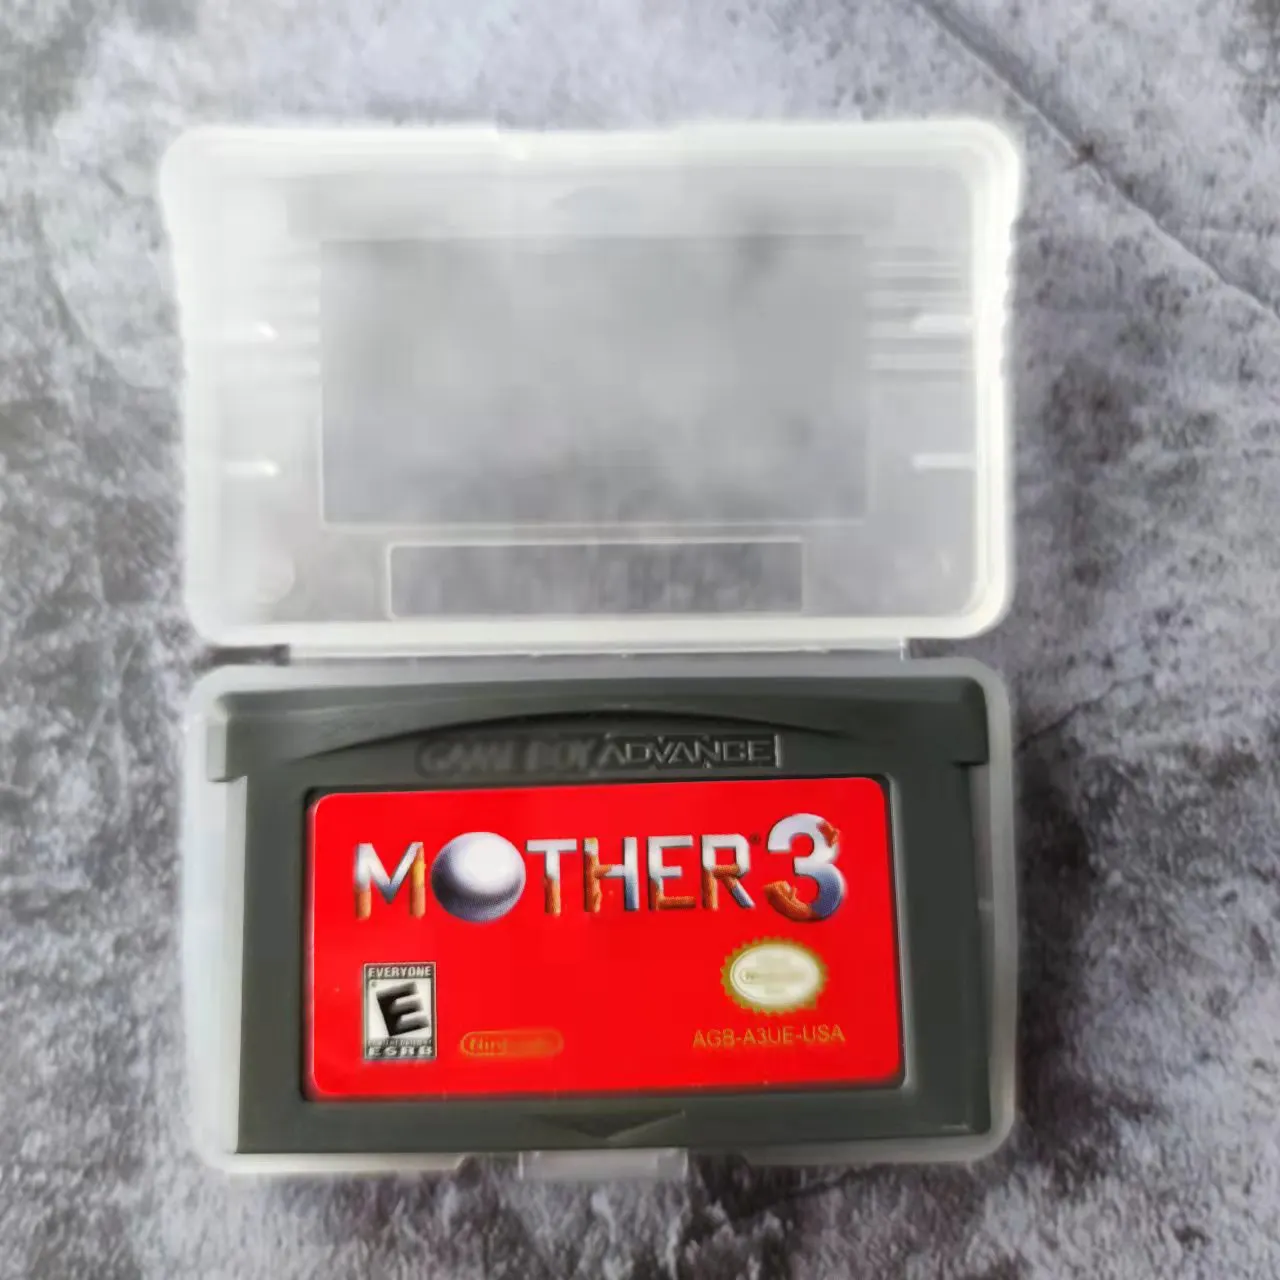 Mother 3 Gameboy Advance Video Game Cartridge for GBA NDSL NDS GBM GBASP